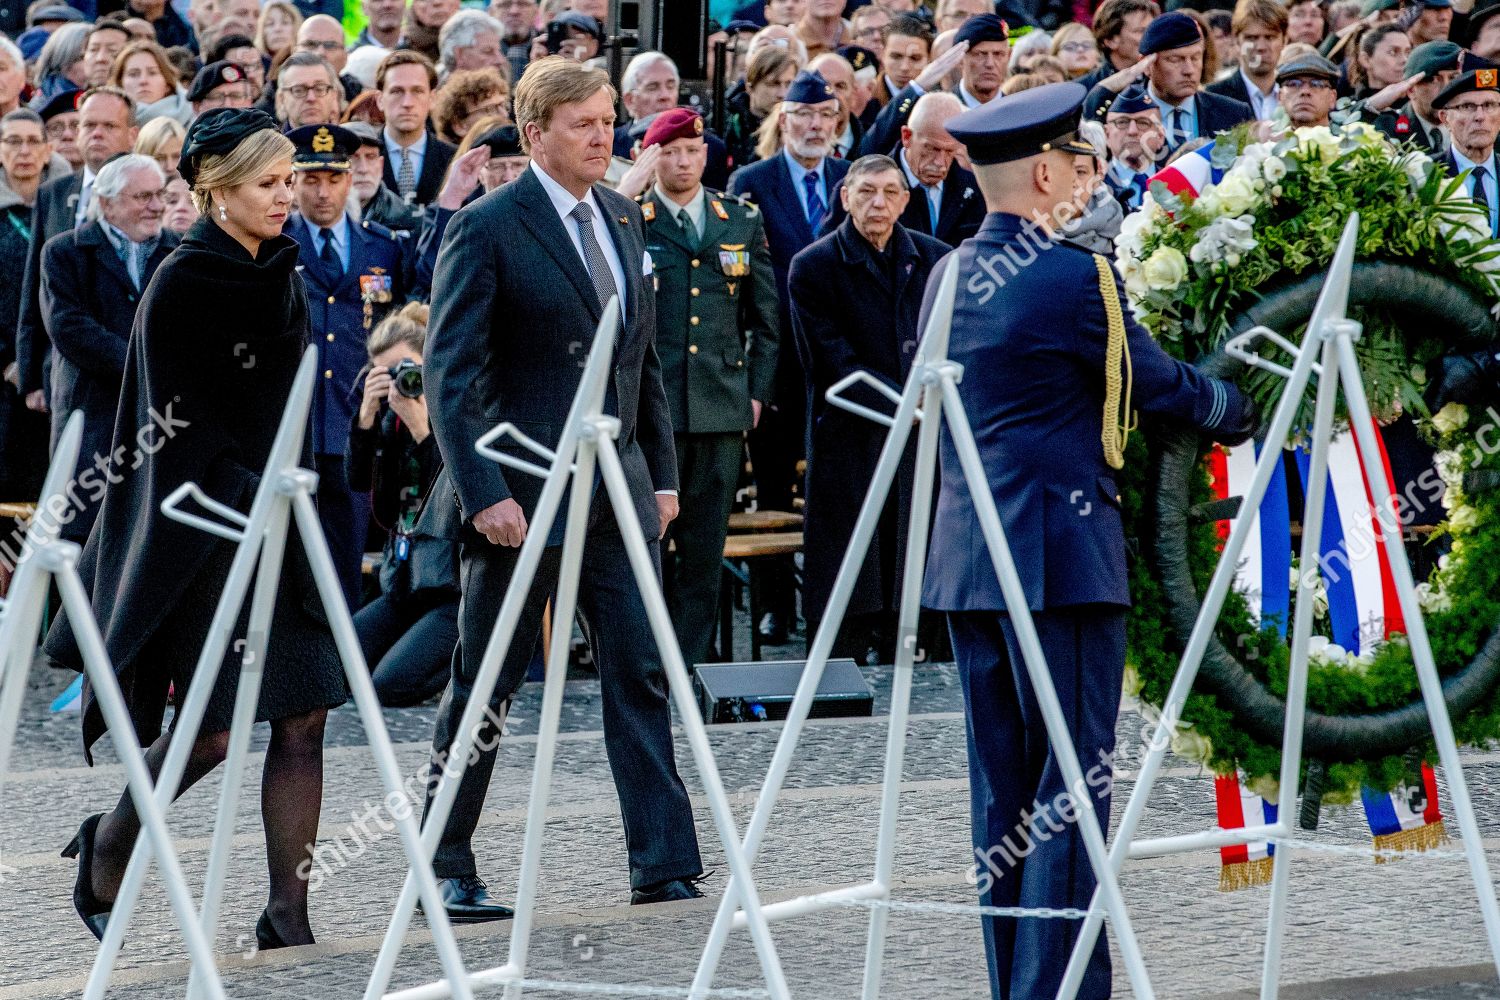 4th-of-may-remembrance-day-ceremony-in-amsterdam-netherlands-shutterstock-editorial-10228724e.jpg